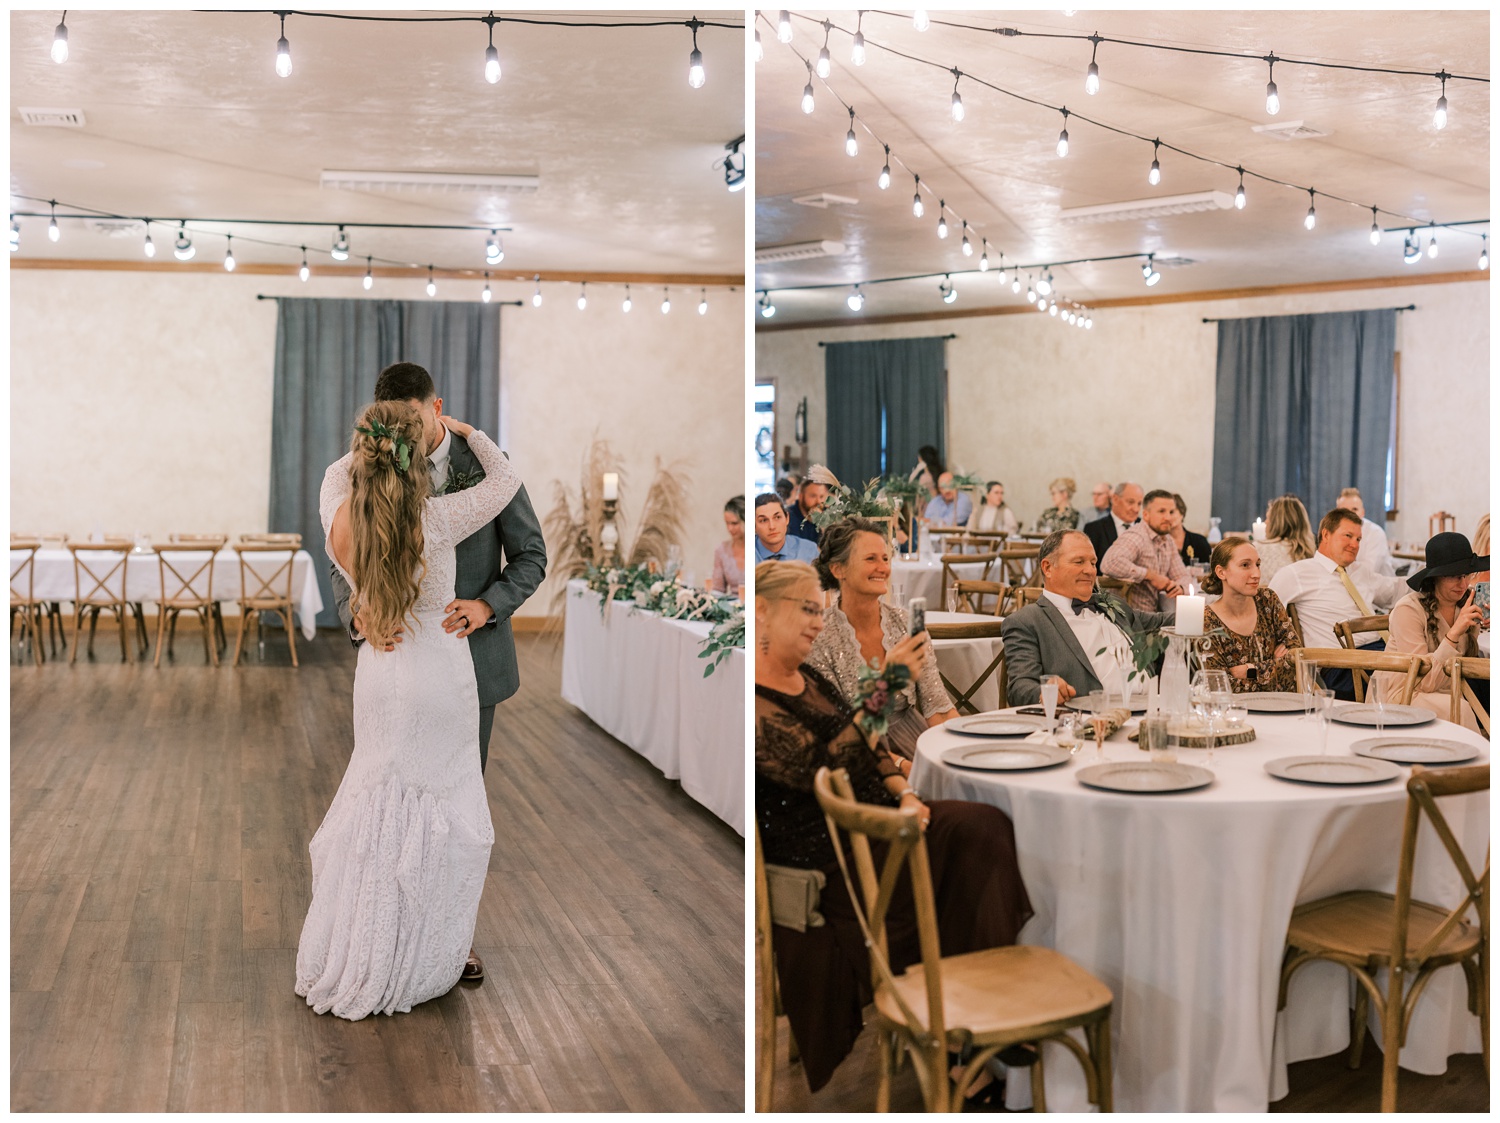 Bride and groom first dance at Illinois wedding reception